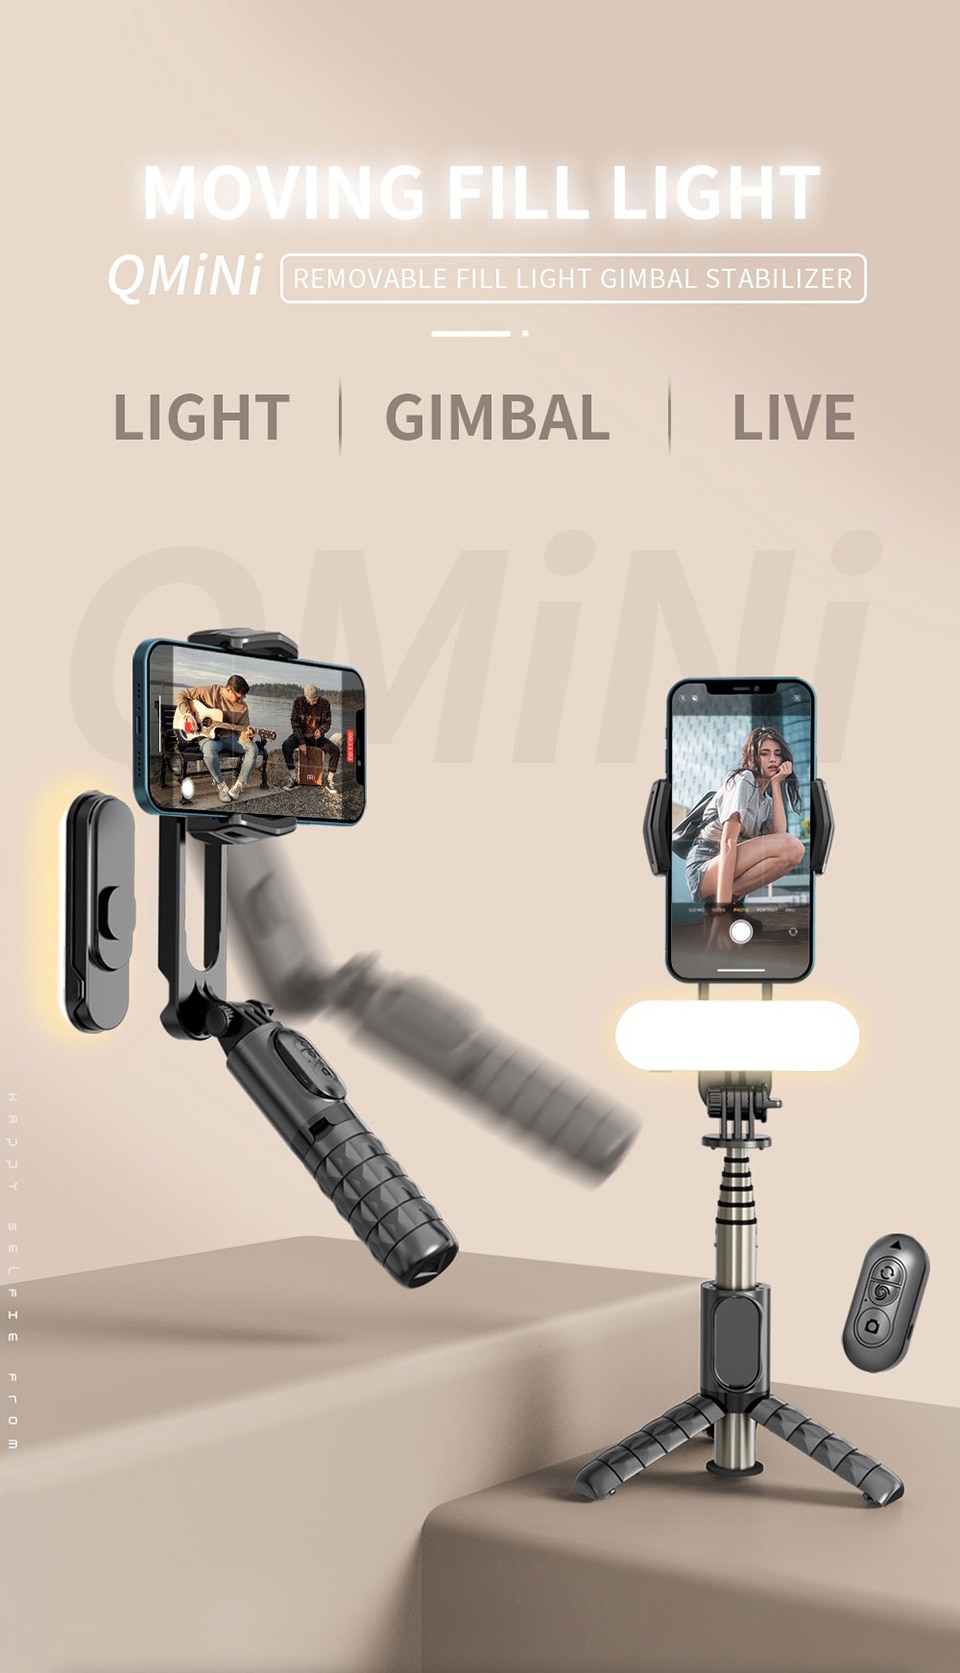 FANGTUOSI Q09 Wireless Bluetooth Selfie Stick Tripod Handheld Gimbal Stabilizer Monopod With fill light shutter for IOS Android